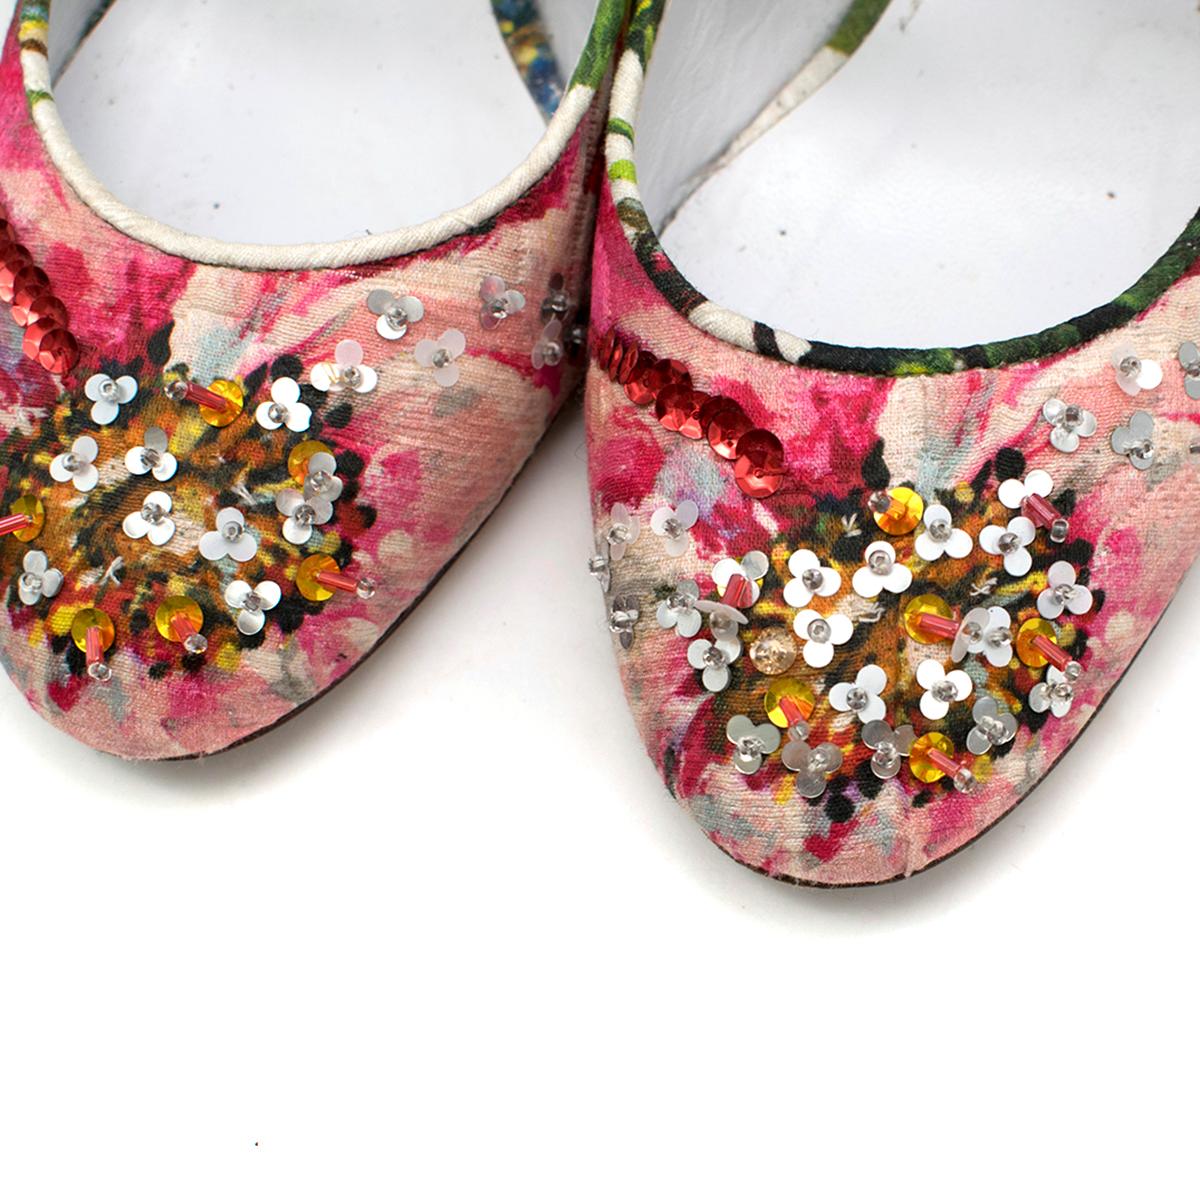  Dolce& Gabbana Embellished Floral Printed Pumps UK 3 In Good Condition For Sale In London, GB